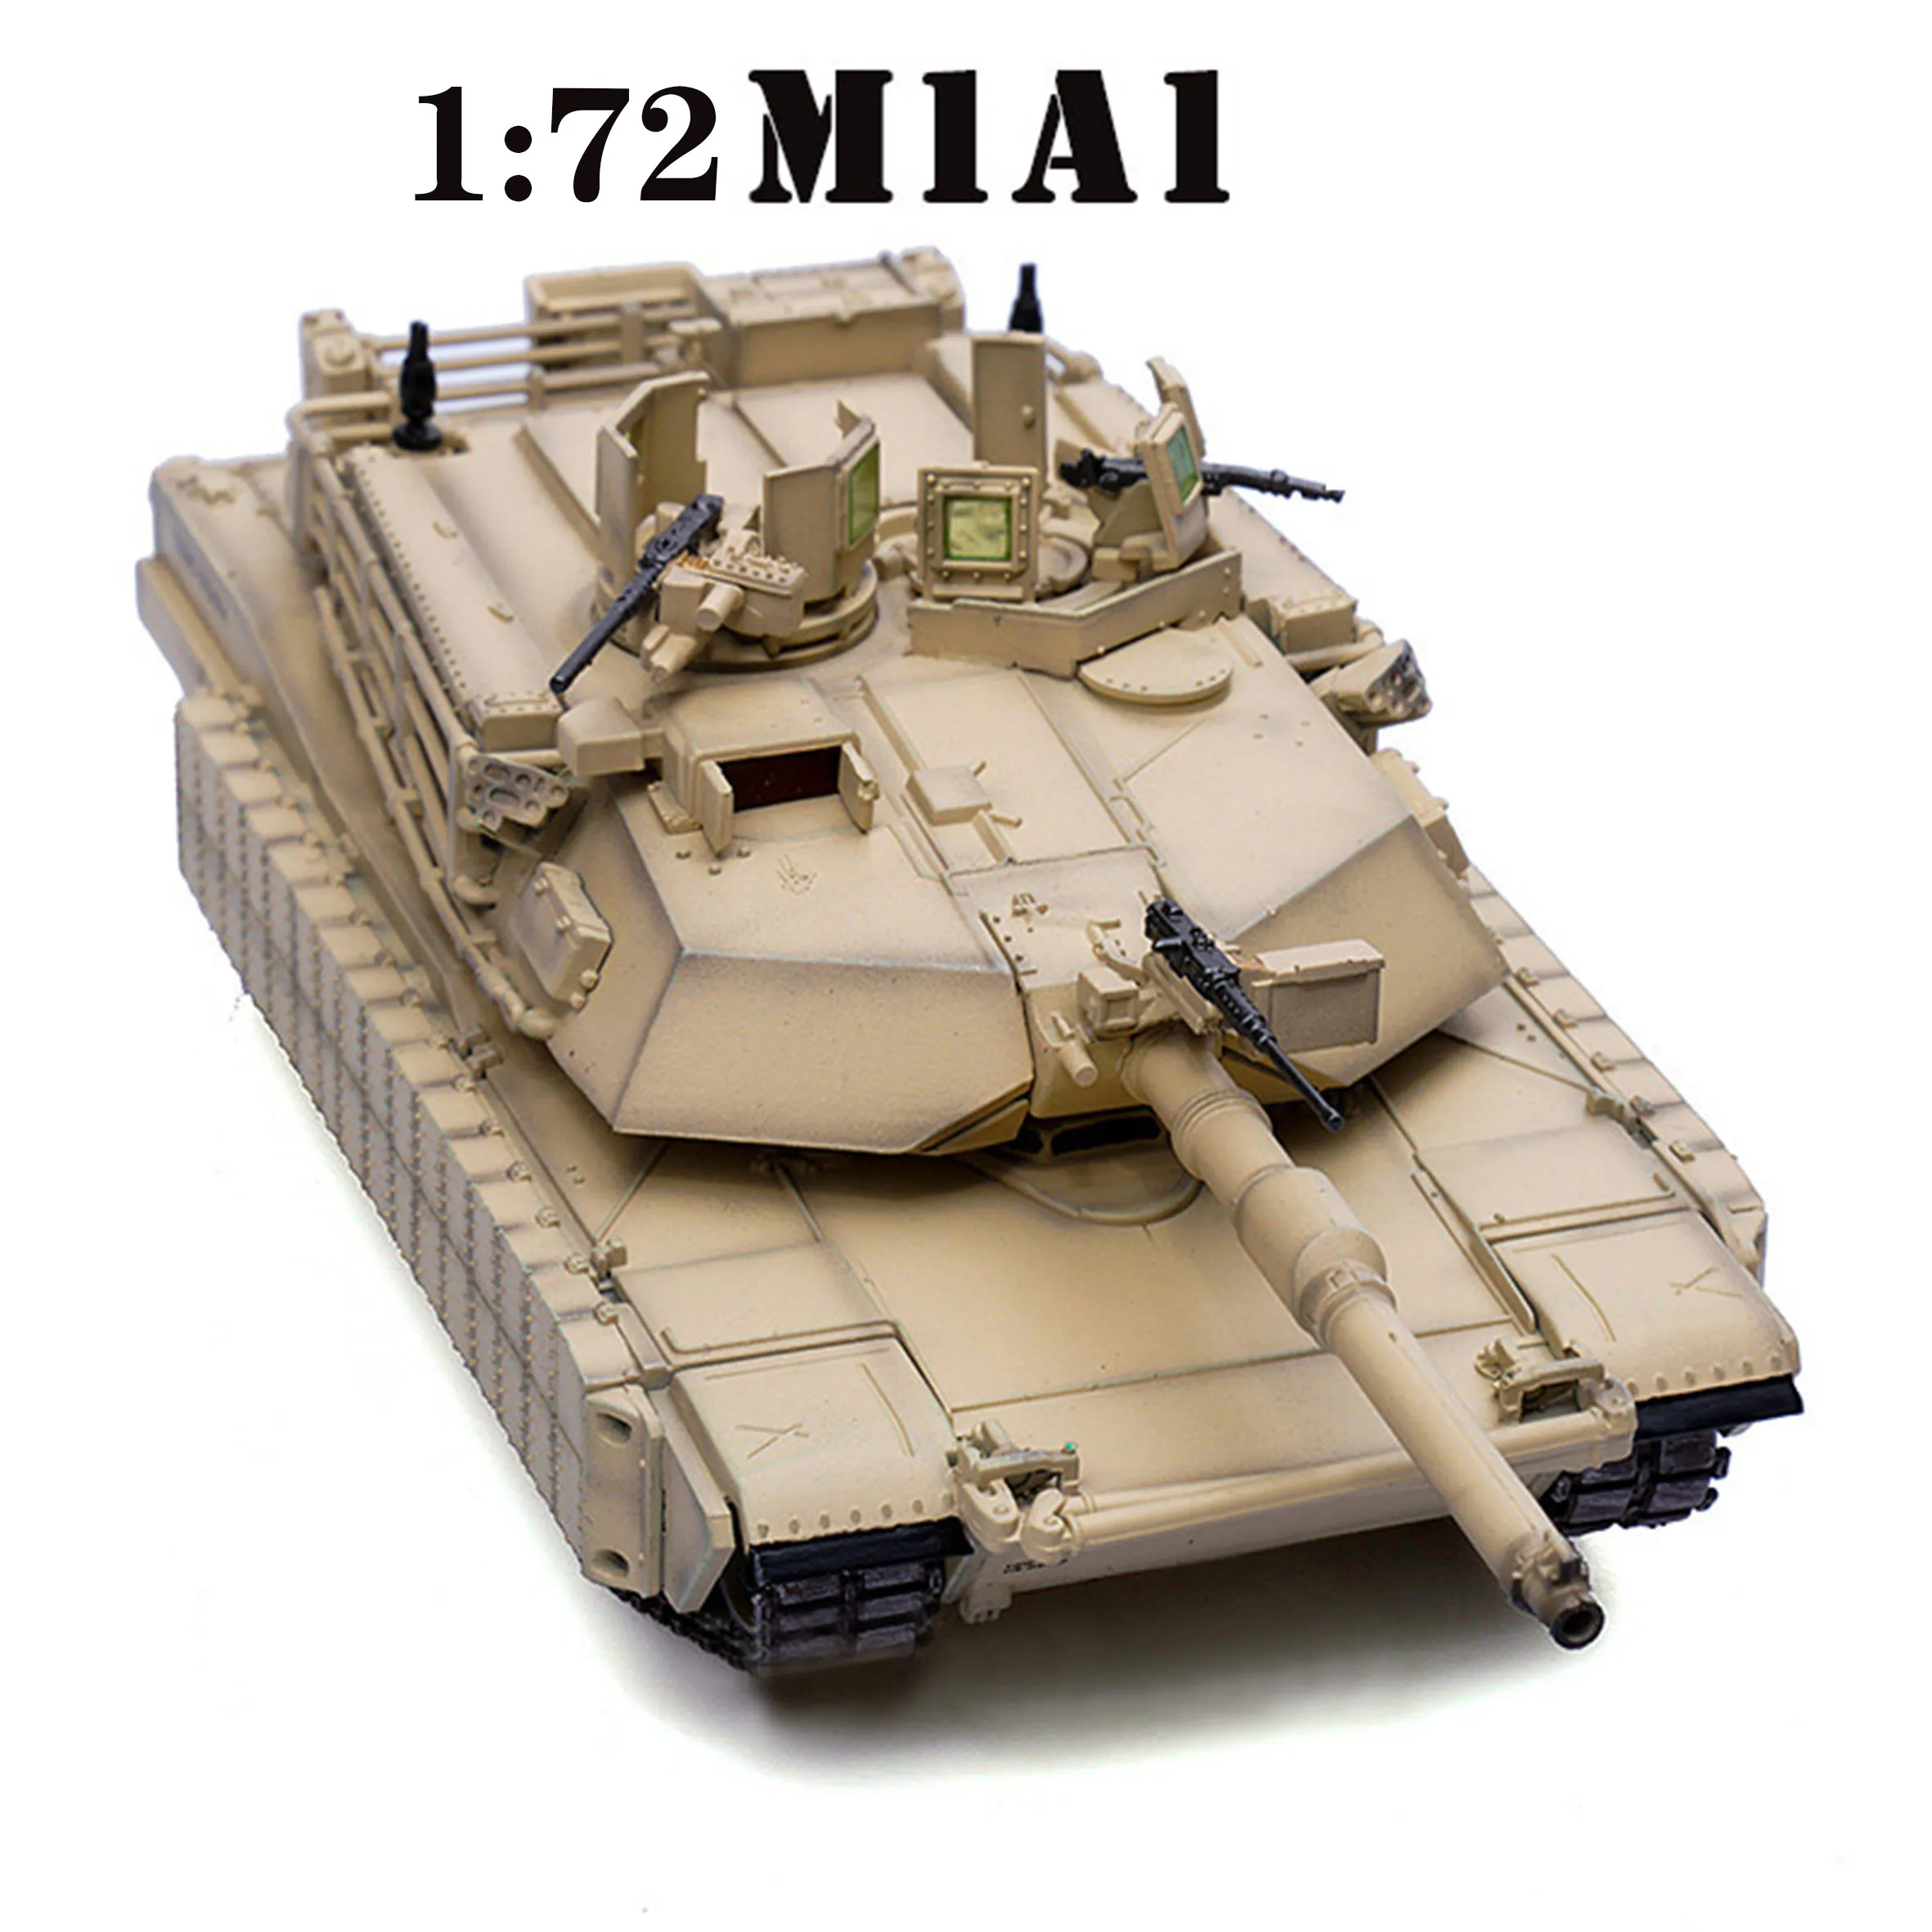 fine-1-72-us-m1a1-tusk-main-battle-tank-model-marine-corps-finished-product-collection-model